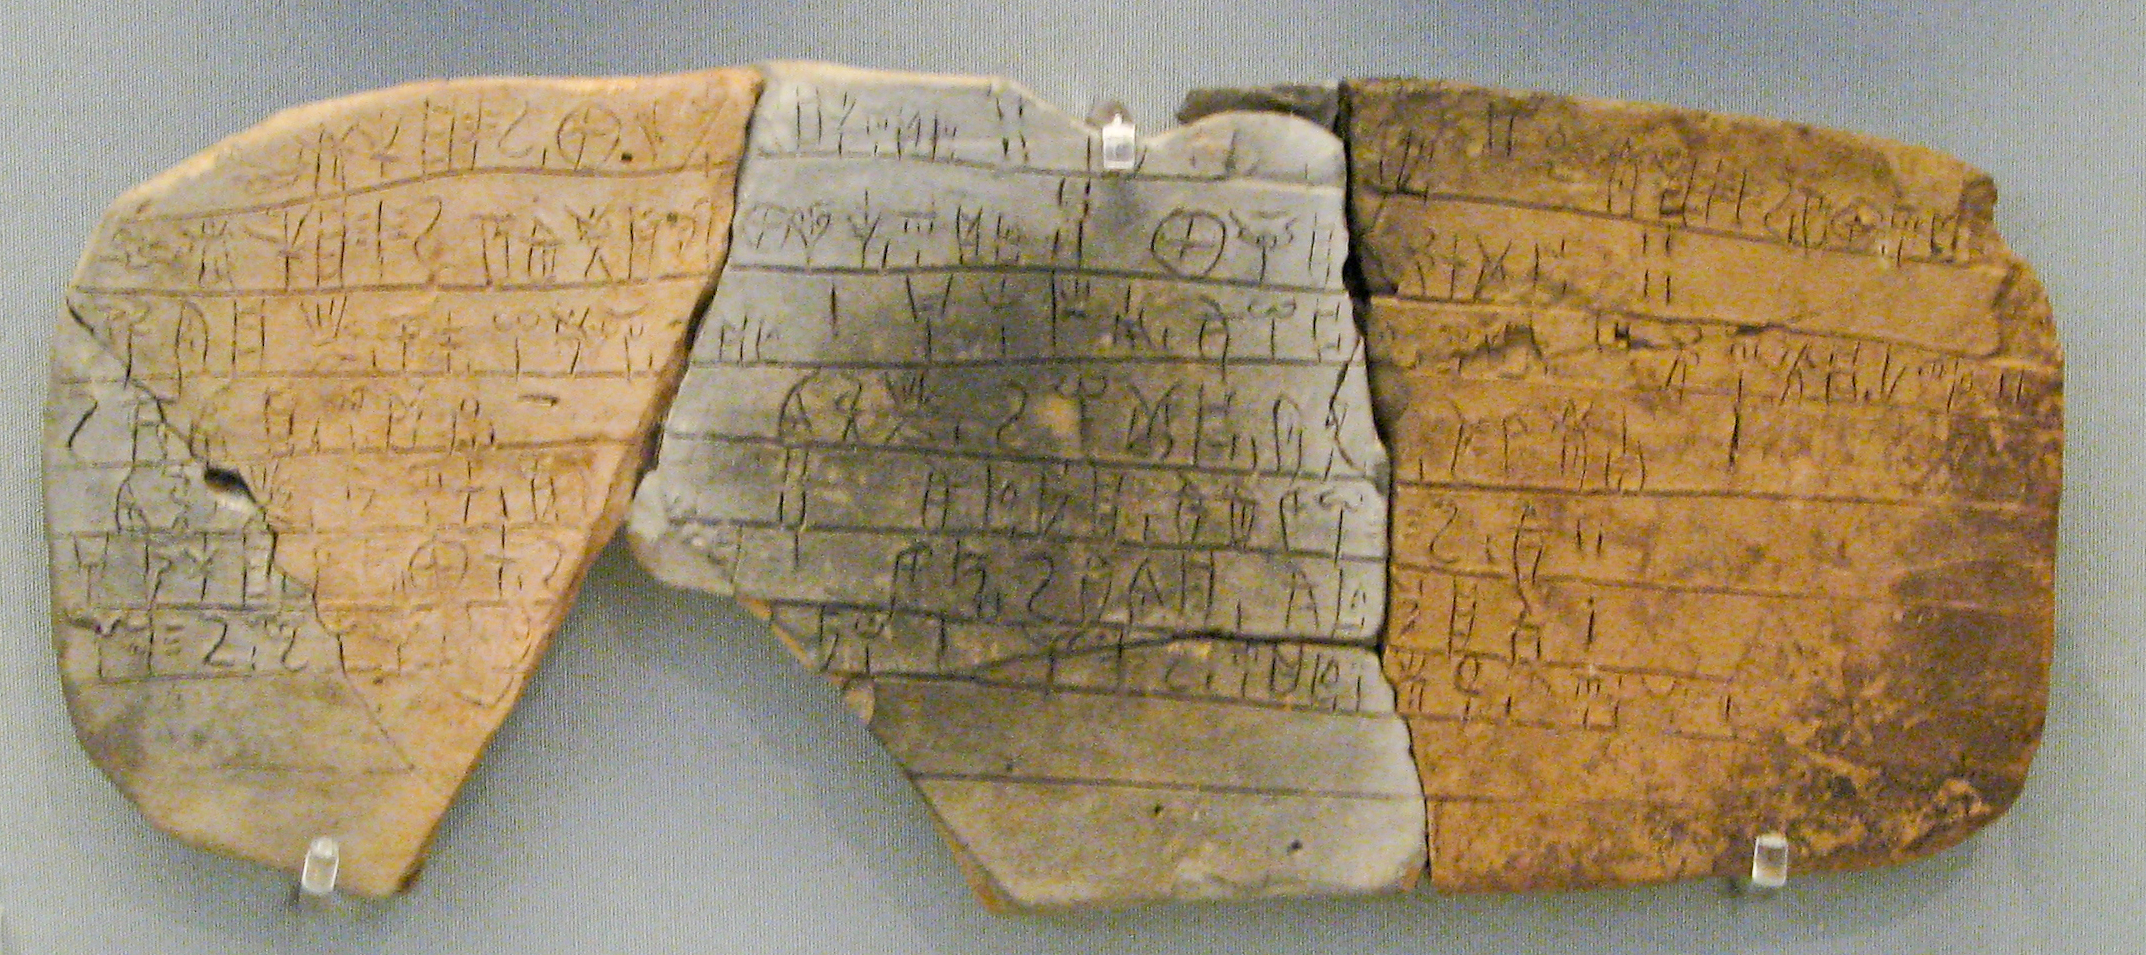 This ancient tablet is called Linear B and is broken into a few pieces.